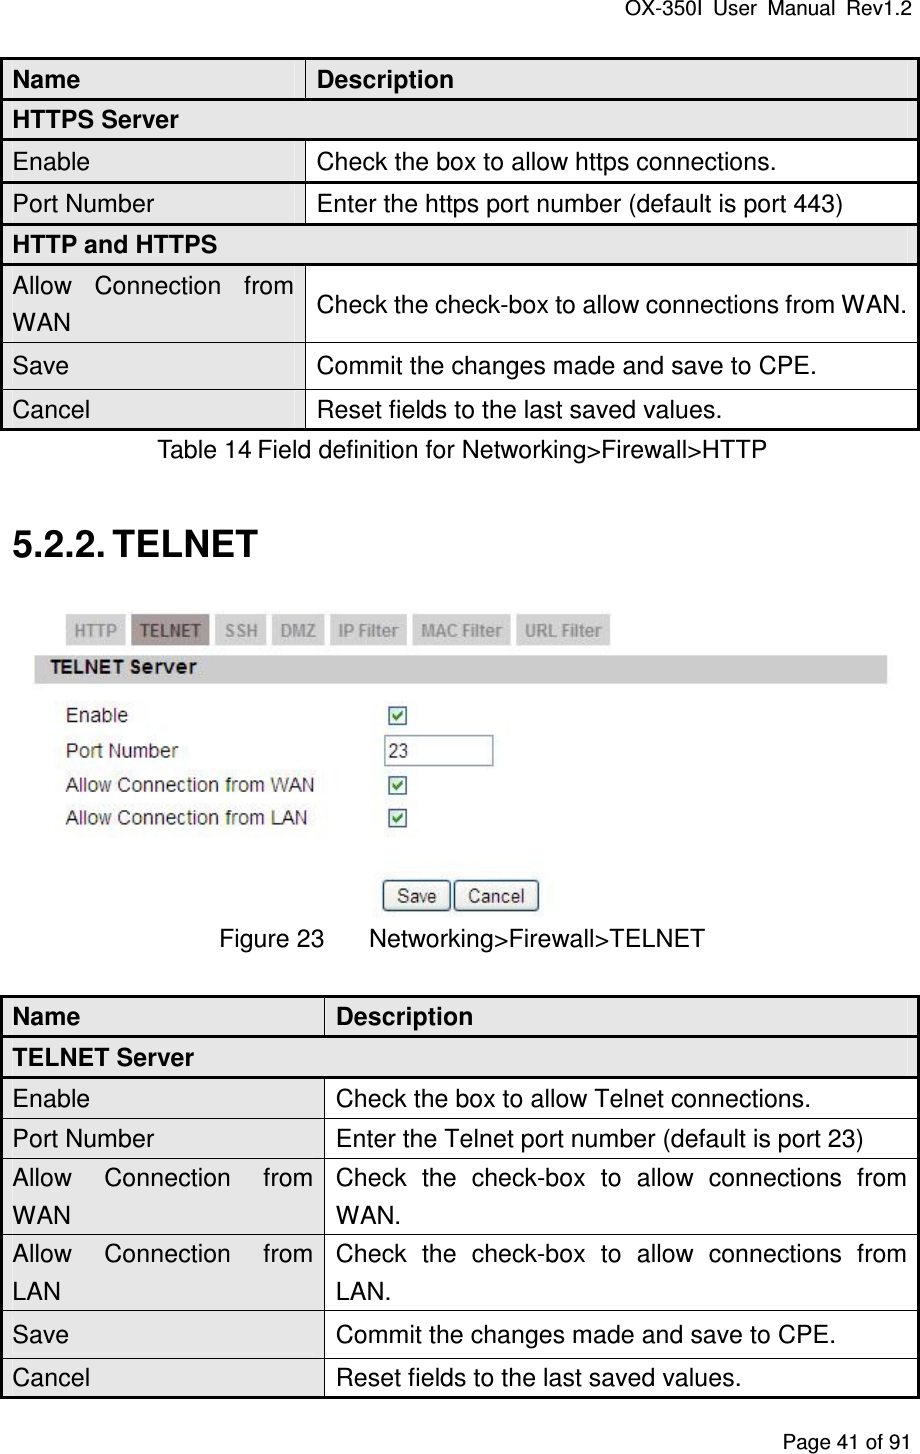 OX-350I  User  Manual  Rev1.2 Page 41 of 91 Name  Description HTTPS Server Enable    Check the box to allow https connections. Port Number  Enter the https port number (default is port 443) HTTP and HTTPS Allow  Connection  from WAN  Check the check-box to allow connections from WAN. Save  Commit the changes made and save to CPE. Cancel  Reset fields to the last saved values. Table 14 Field definition for Networking&gt;Firewall&gt;HTTP 5.2.2. TELNET  Figure 23  Networking&gt;Firewall&gt;TELNET Name  Description TELNET Server Enable    Check the box to allow Telnet connections. Port Number  Enter the Telnet port number (default is port 23) Allow  Connection  from WAN Check  the  check-box  to  allow  connections  from WAN. Allow  Connection  from LAN Check  the  check-box  to  allow  connections  from LAN. Save  Commit the changes made and save to CPE. Cancel  Reset fields to the last saved values. 